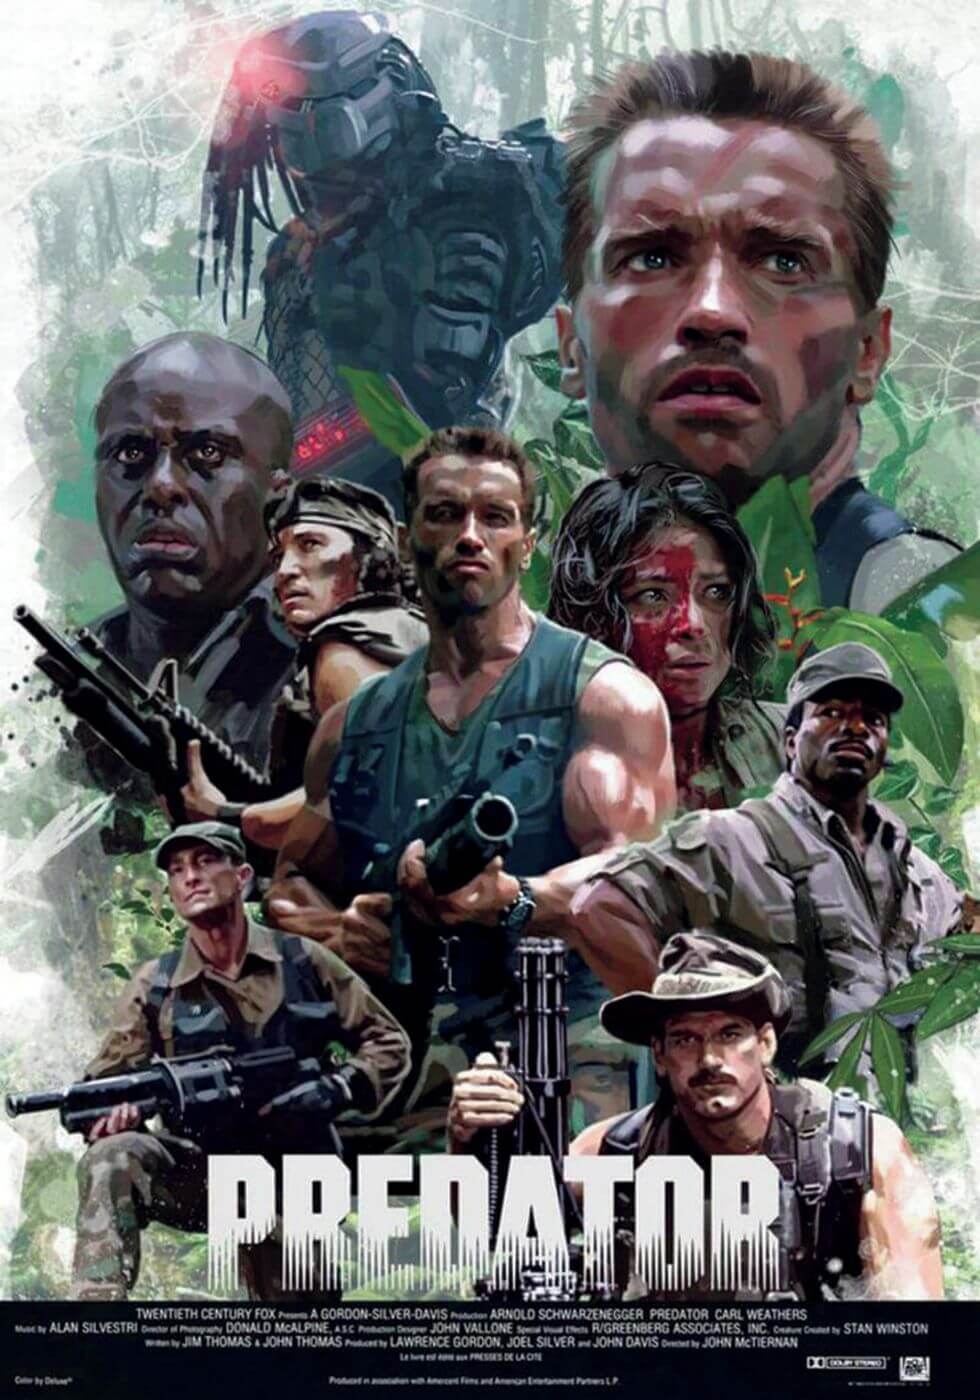 Predator Arnold Schwarzenegger Hollywood Action Movie Poster Collection Life Size Posters By Tim Buy Posters Frames Canvas Digital Art Prints Small Compact Medium And Large Variants